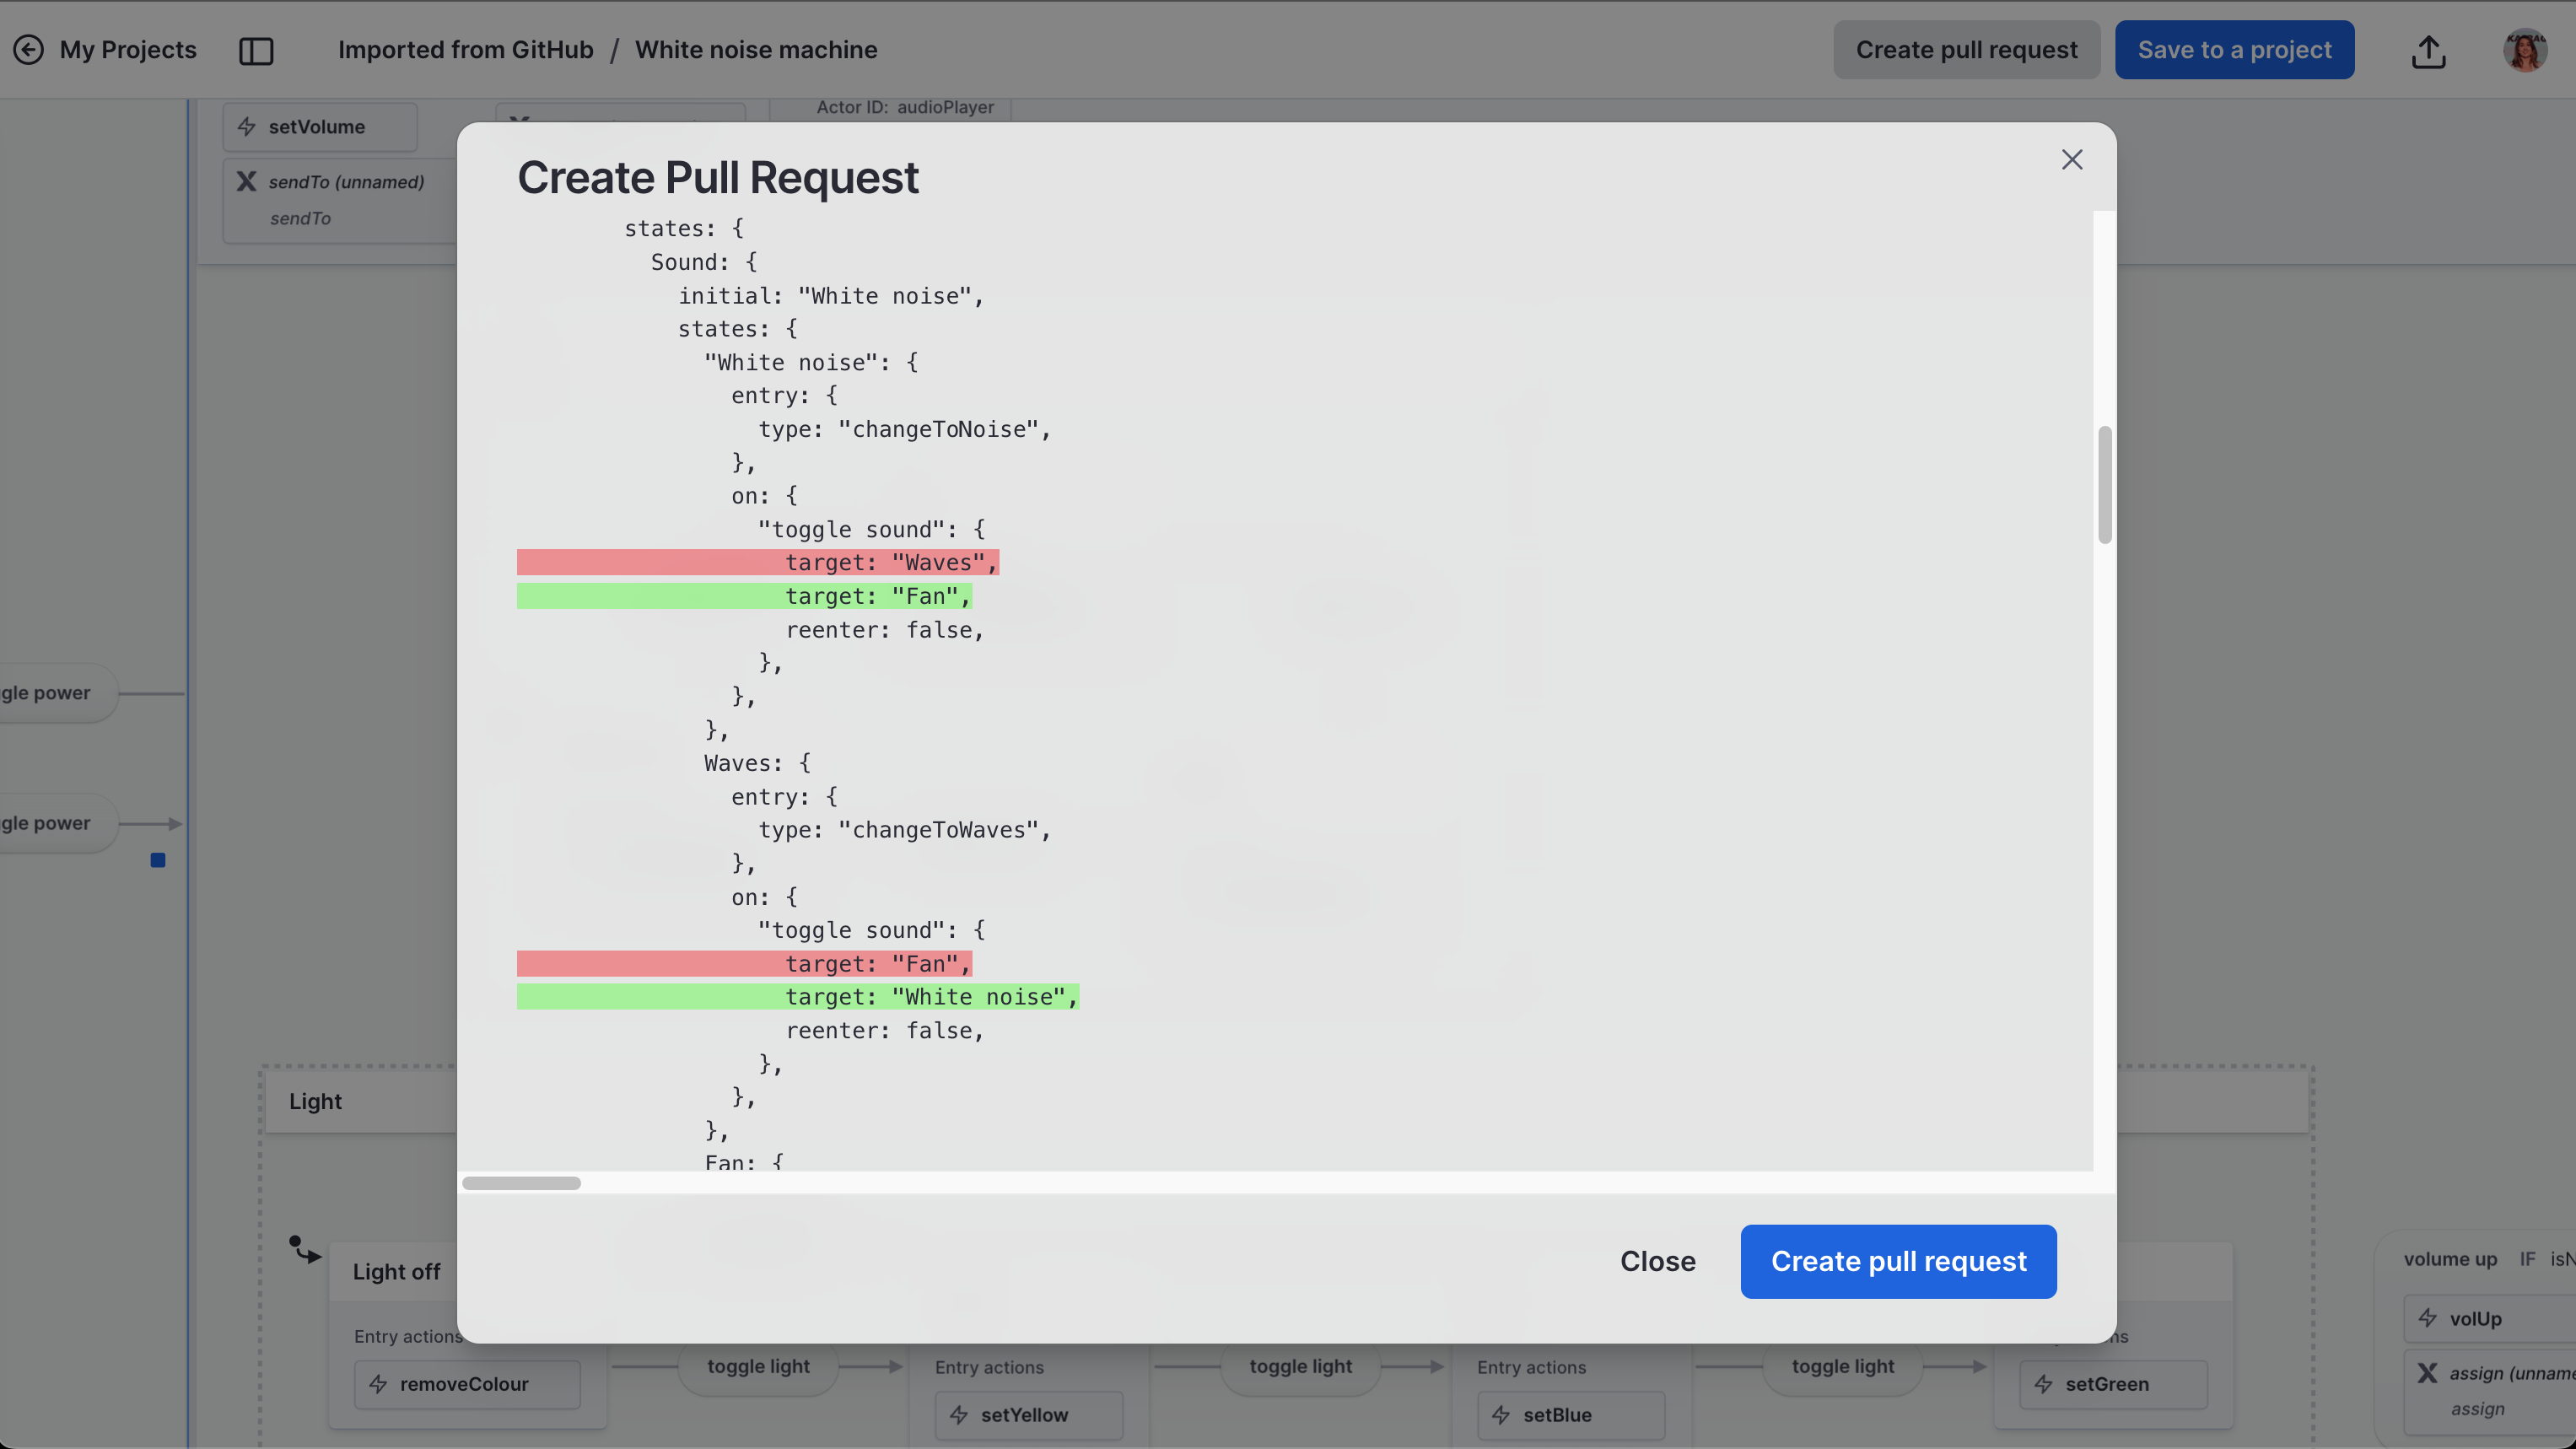 The pull request modal in Stately Studio showing deleted lines of code in red and inserted lines of code in green.